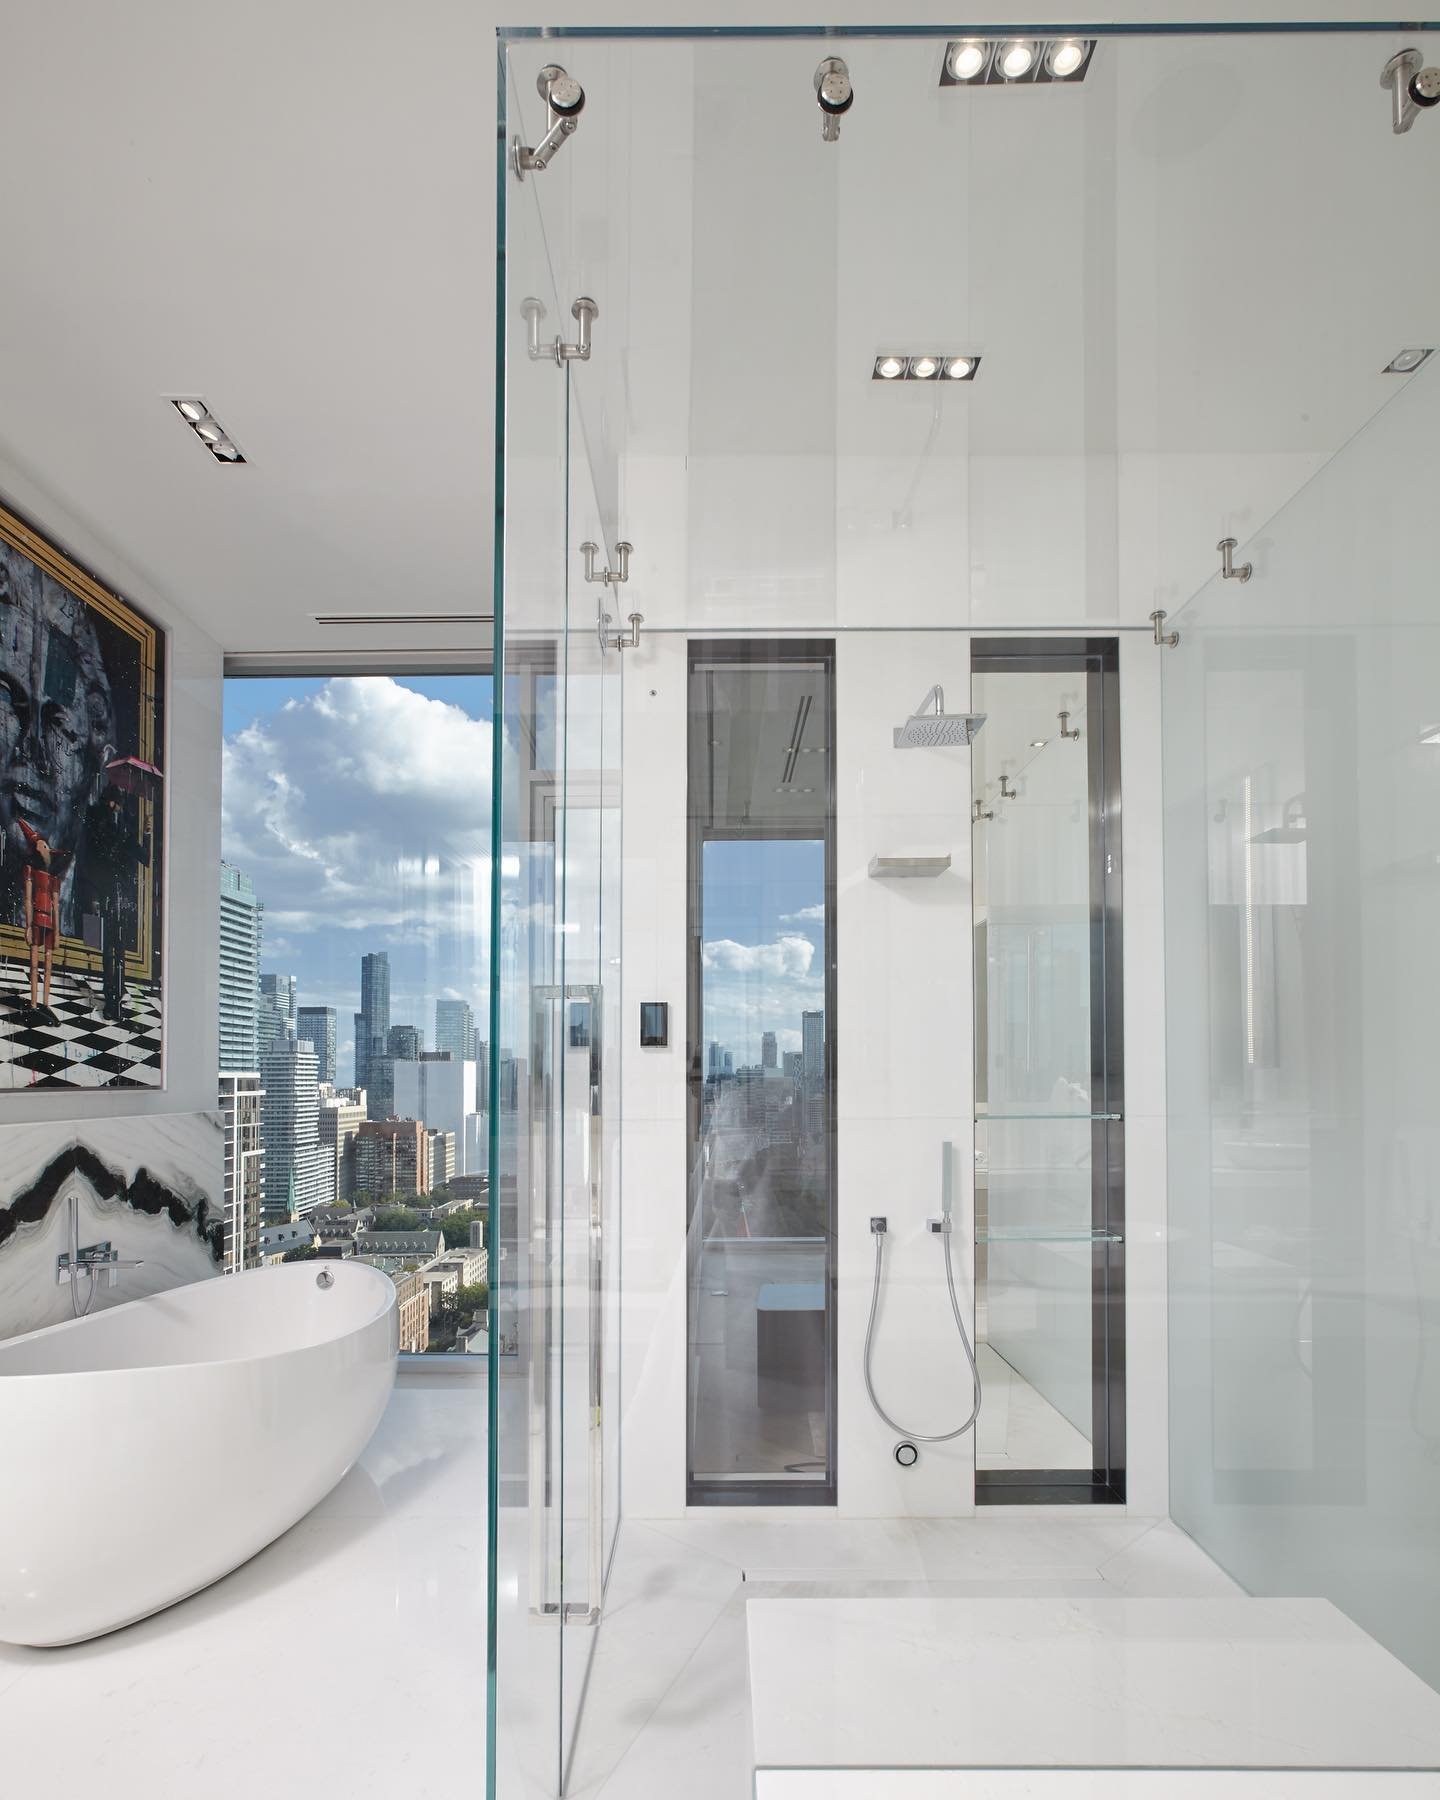 Planning and Logistics are two of the most important processes in our business. This shower involved ordering custom Starphire glass prior to any stone slabs being installed. All marble slab installation was executed to millimetre precision from draw